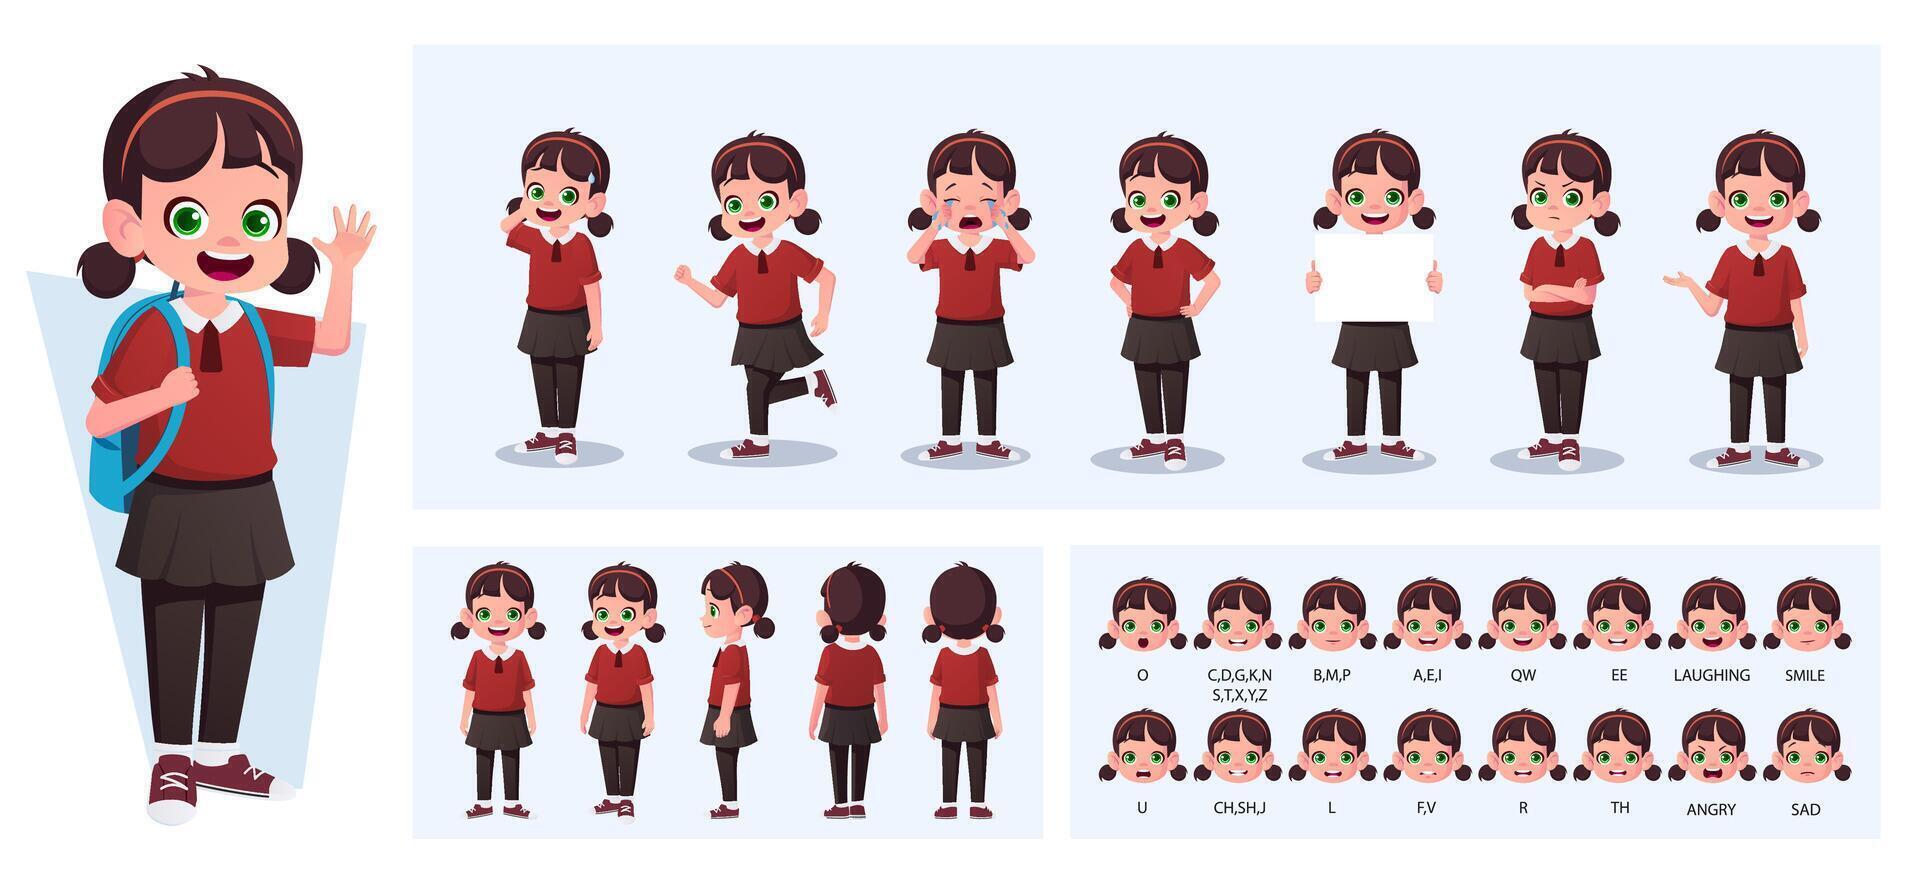 Little Girl Character Constructor with Gestures, Actions and Emotions. Child Side, Front, Rear View, Movable Body Parts for Animation and Lip-Sync Vector Illustration